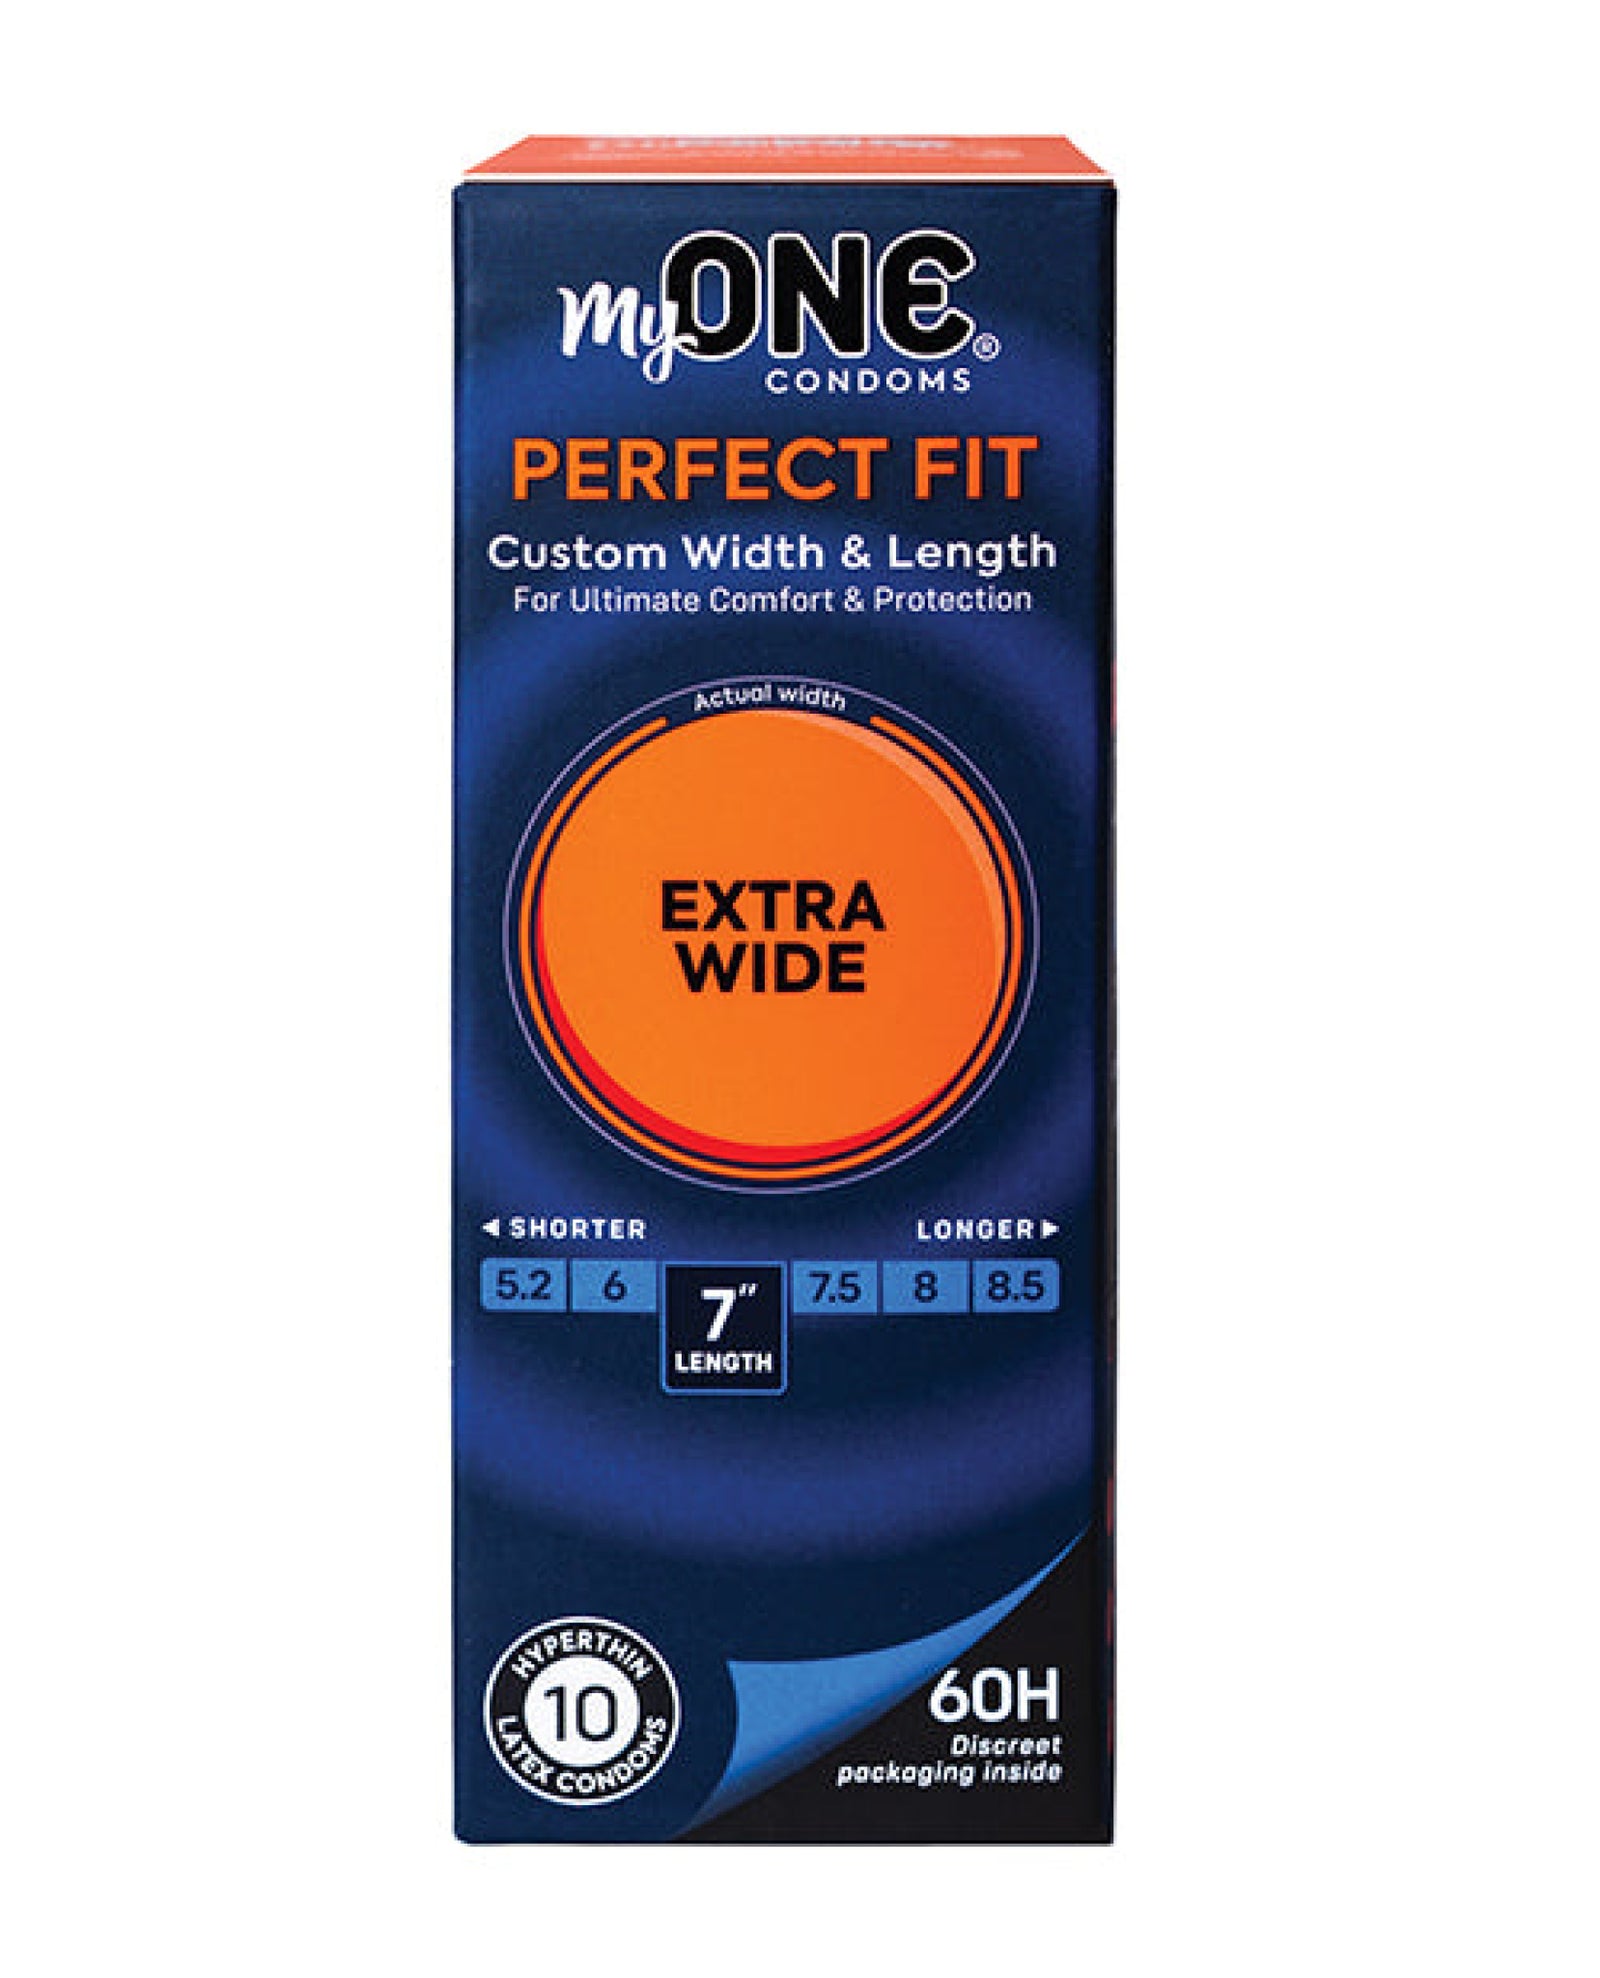 My One Extra Wide Condoms - Pack of 10 Paradise Marketing